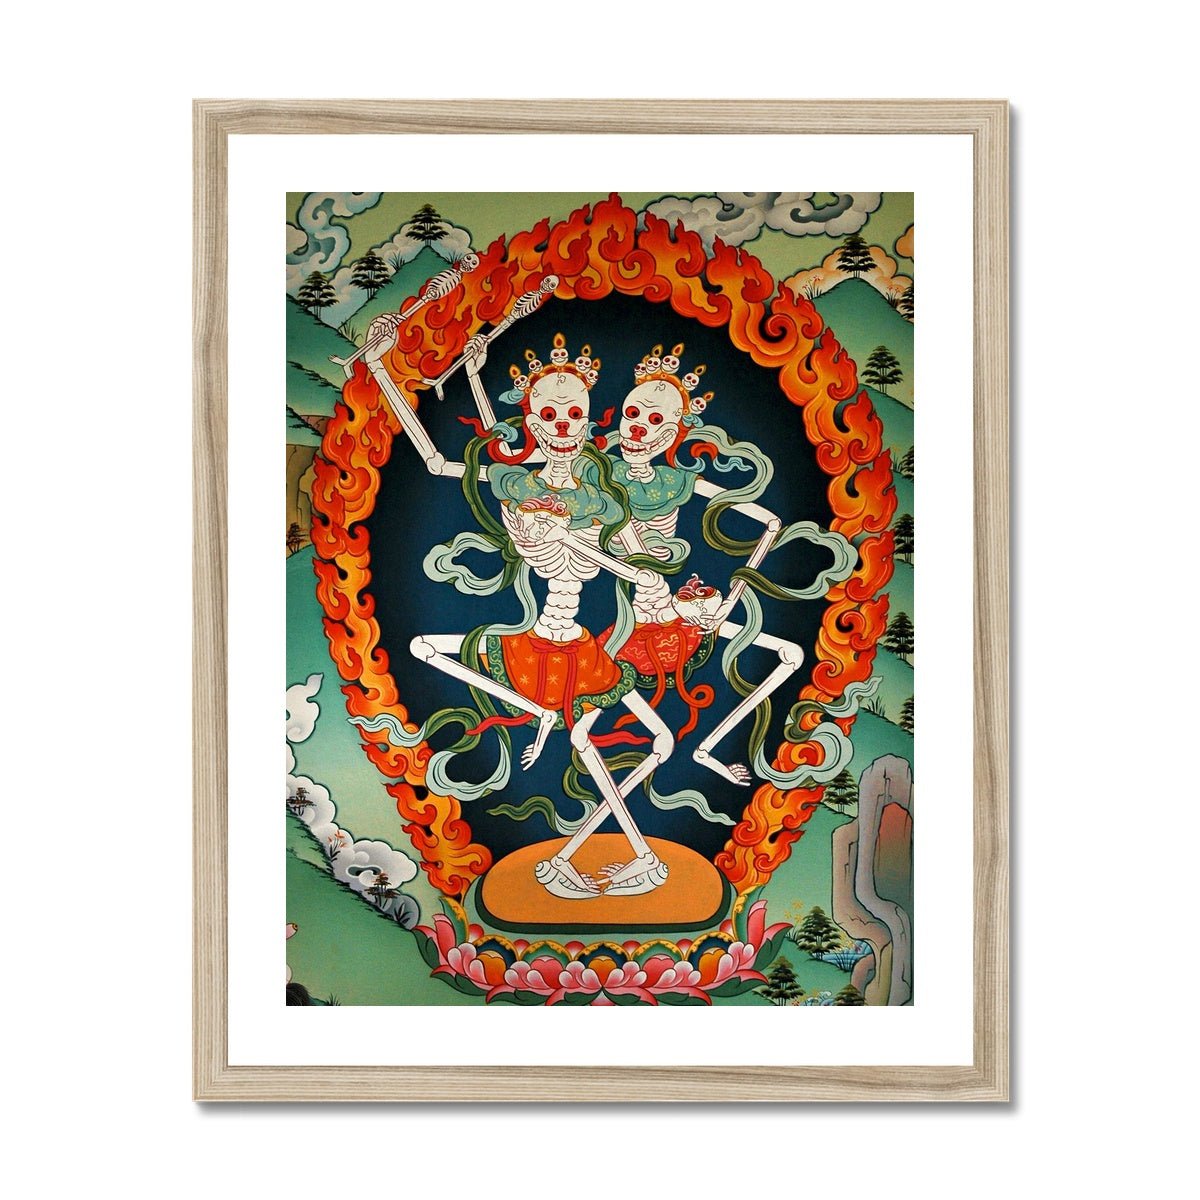 Framed Print 6"x8" / Natural Frame Citipati, Tibetan Protector, Thangka, Skeleton Lord and Lady of the Cemetery Nepal Buddhist Decor Wall Art Framed Art Print